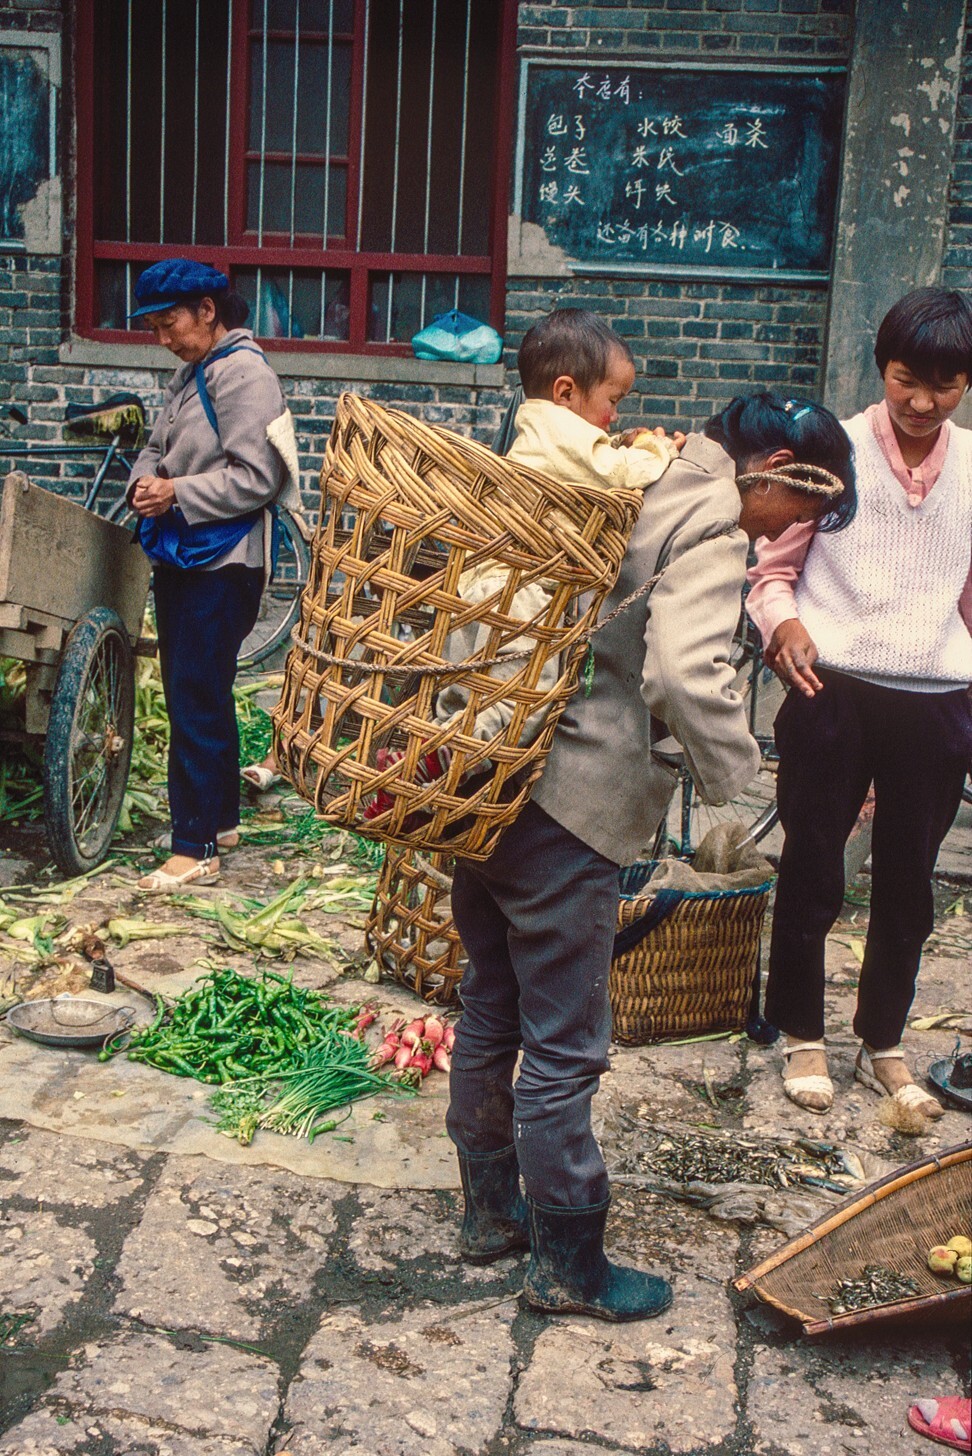 A baby in a basket in Lijiang Old Town, Yunnan province, 1995. Photo: Bruce Connolly